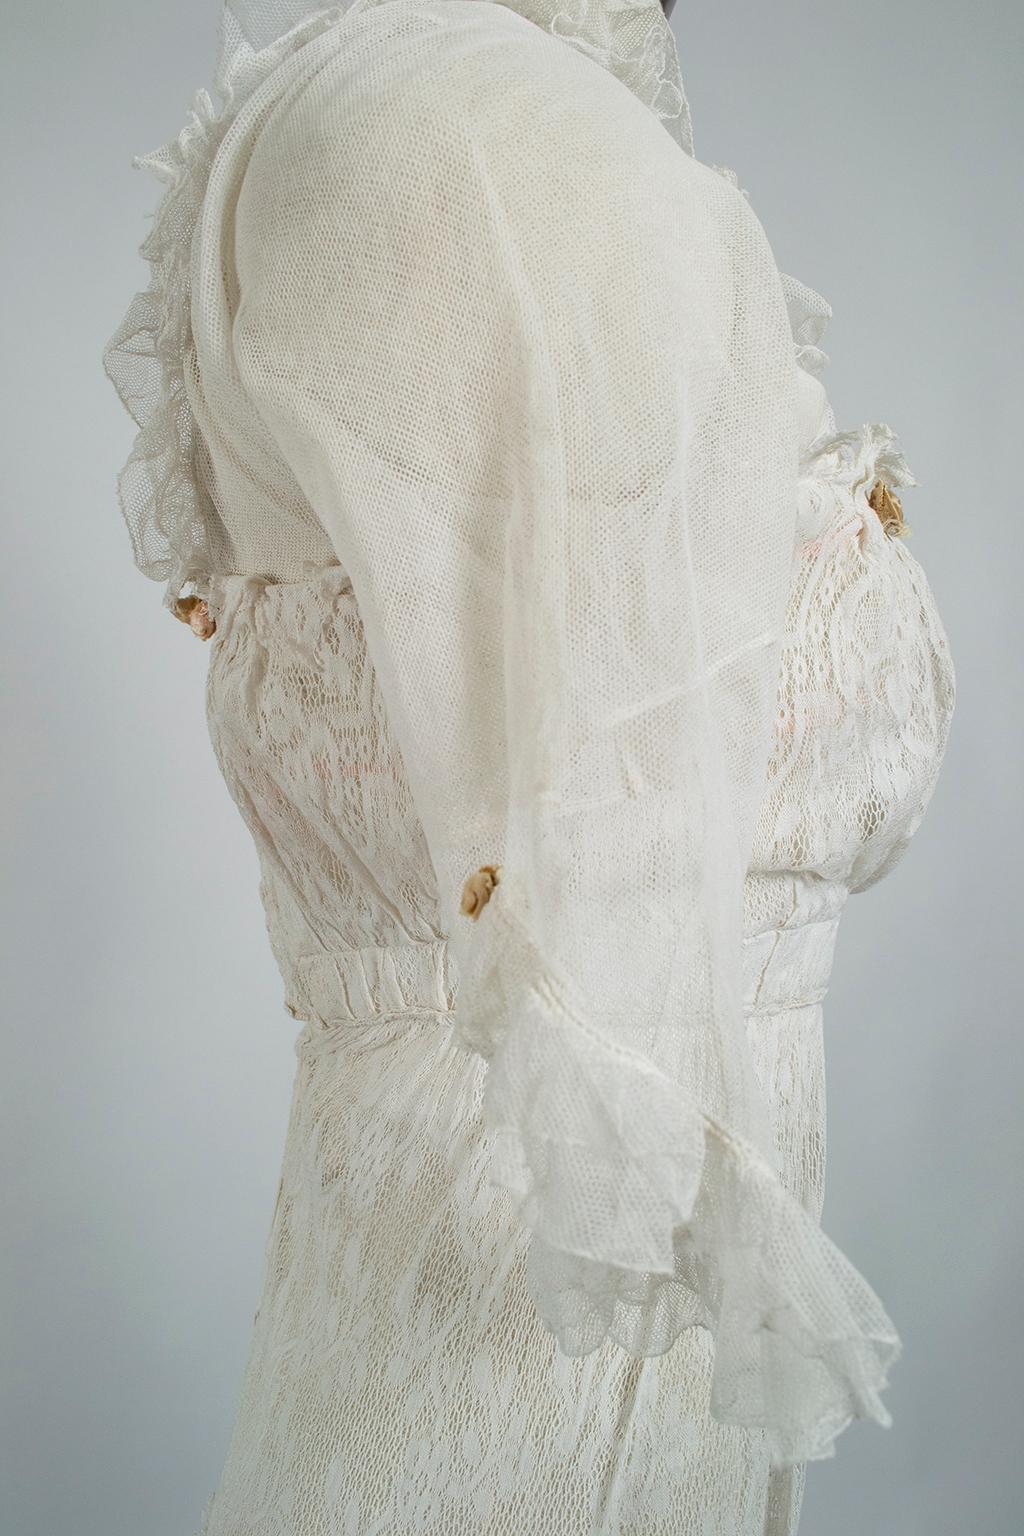 White Edwardian Net Rosebud Afternoon Tea or Bridal Gown - XXS, Early 1900s In Good Condition For Sale In Tucson, AZ